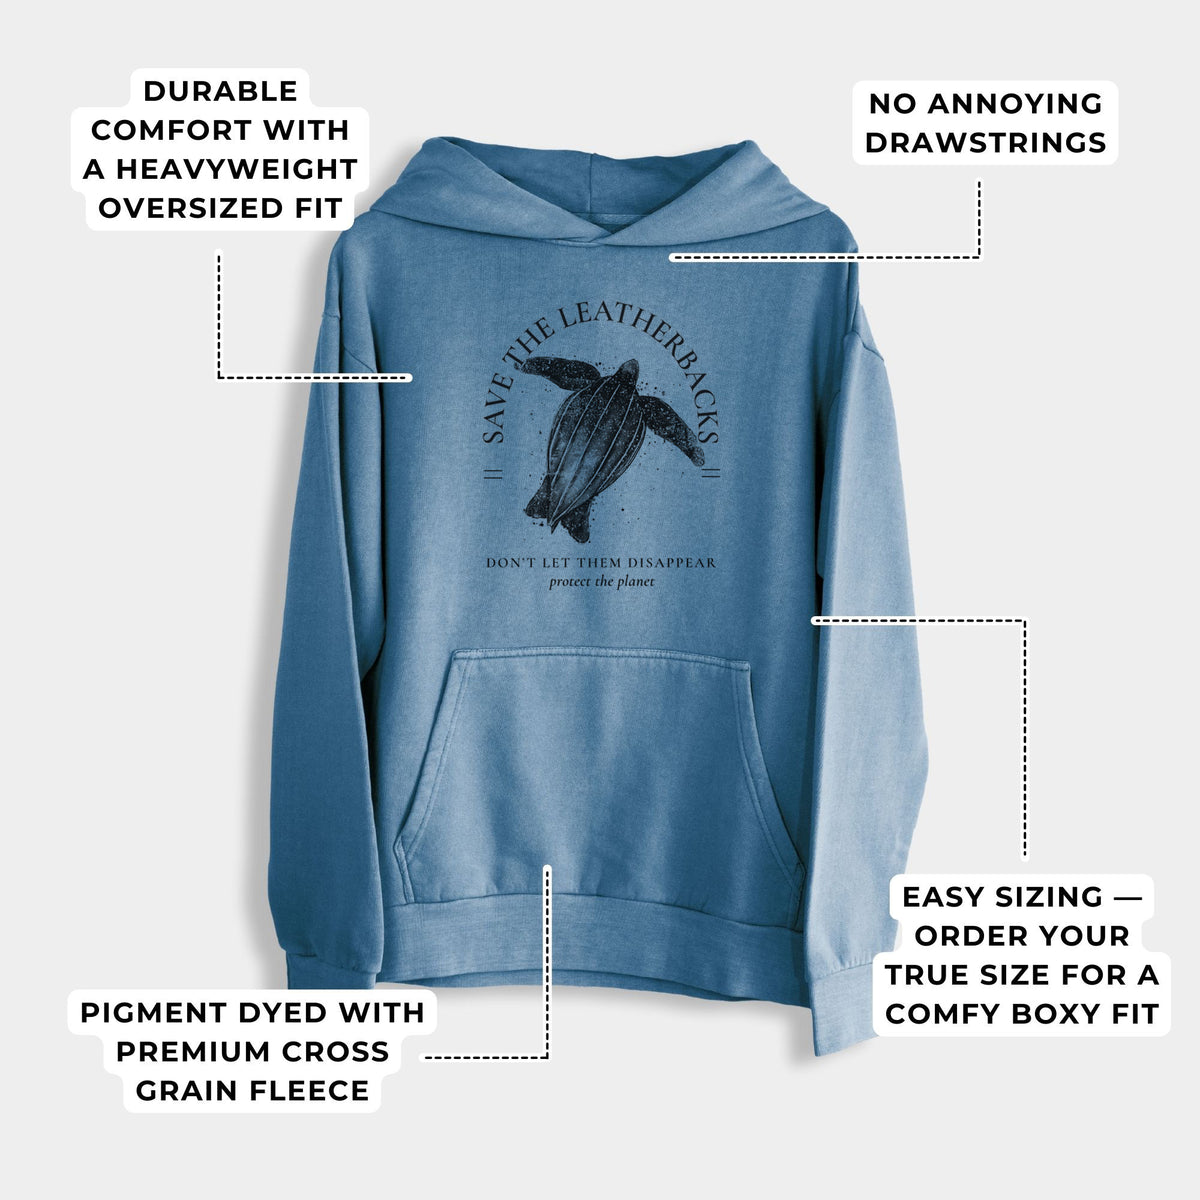 Save the Leatherbacks - Don&#39;t Let Them Disappear  - Urban Heavyweight Hoodie